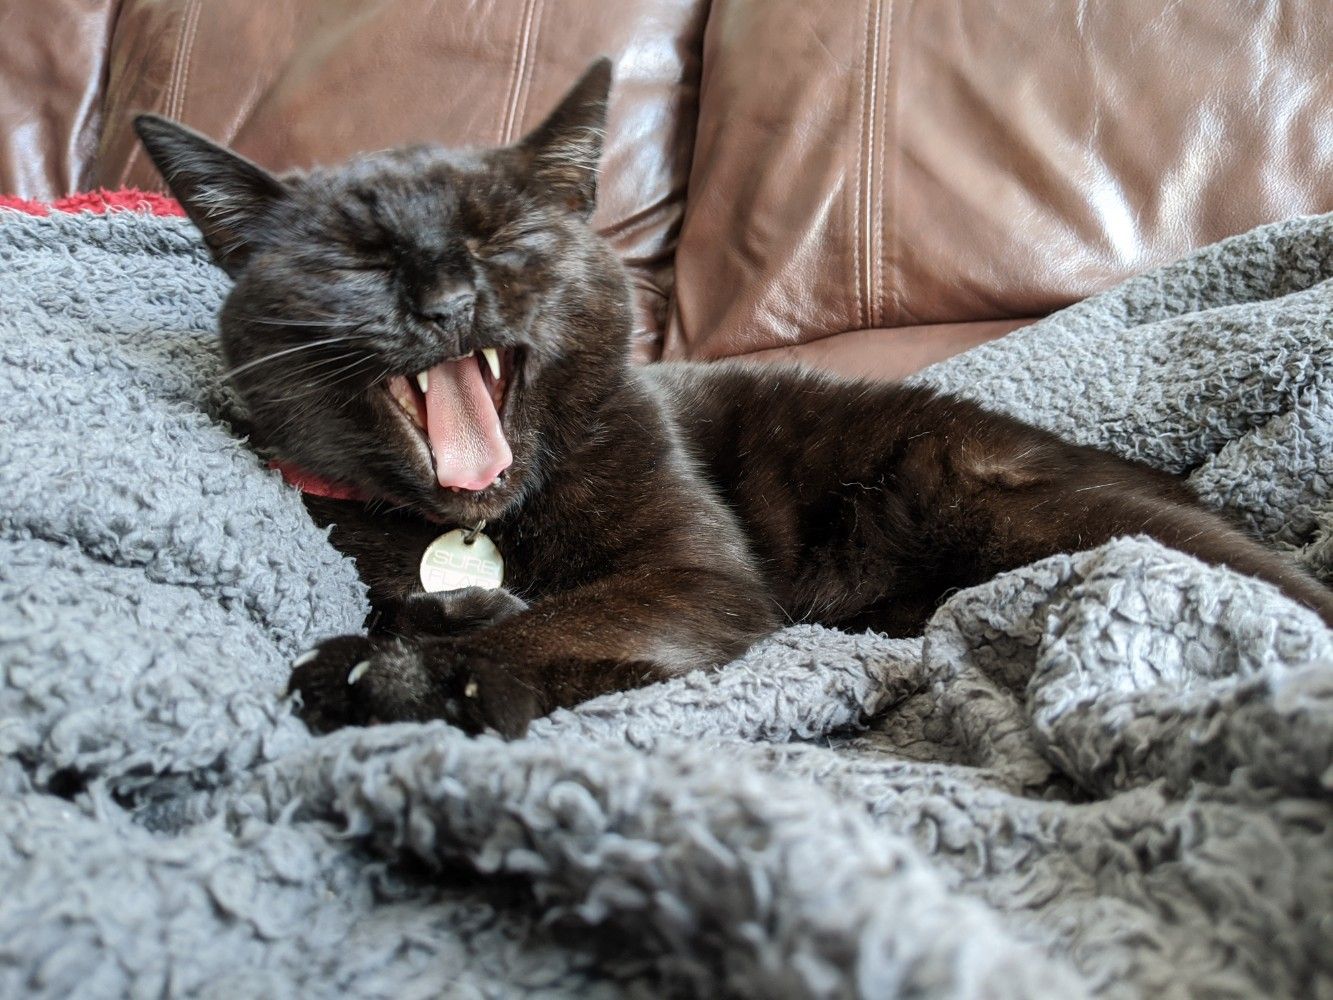 Black cat sitting up on a grey blanket, yawning very much